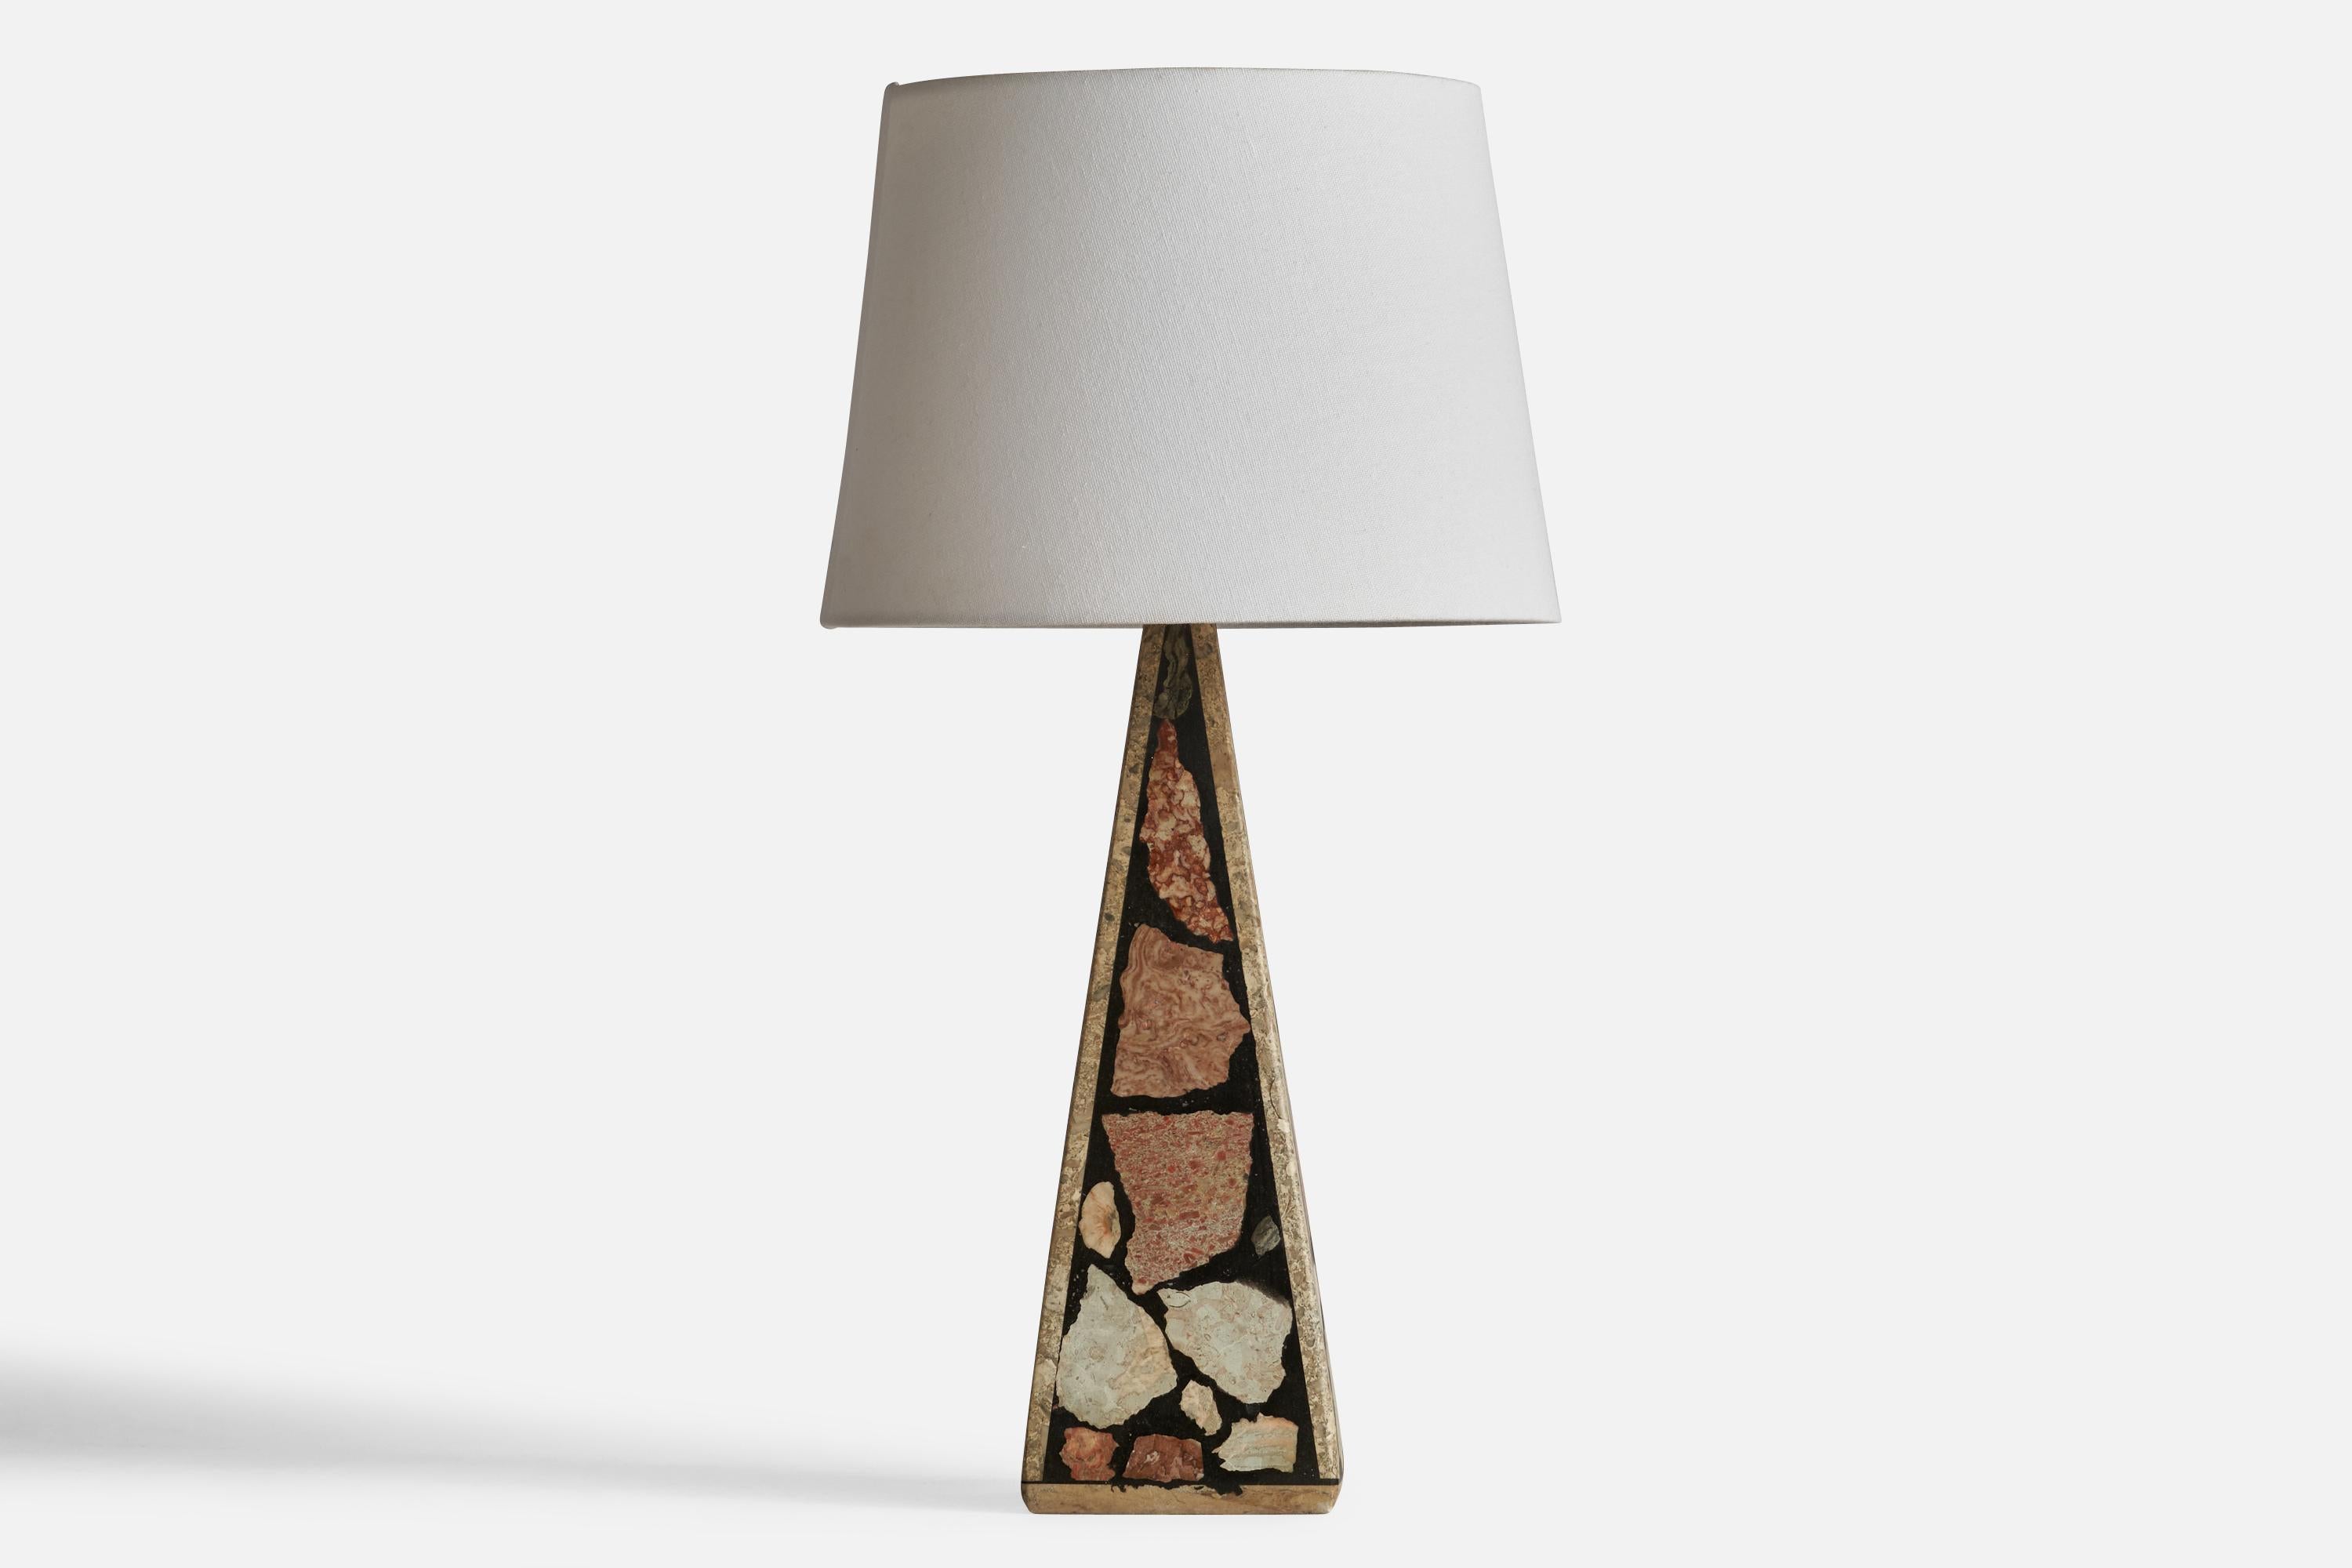 A fossil stone table lamp designed and produced in Gotland, Sweden, c. 1970s.

Dimensions of Lamp (inches): 14.5  H x 4.25”  Diameter
Dimensions of Shade (inches): 8” Top Diameter x 10” Bottom Diameter x 7” H
Dimensions of Lamp with Shade (inches):